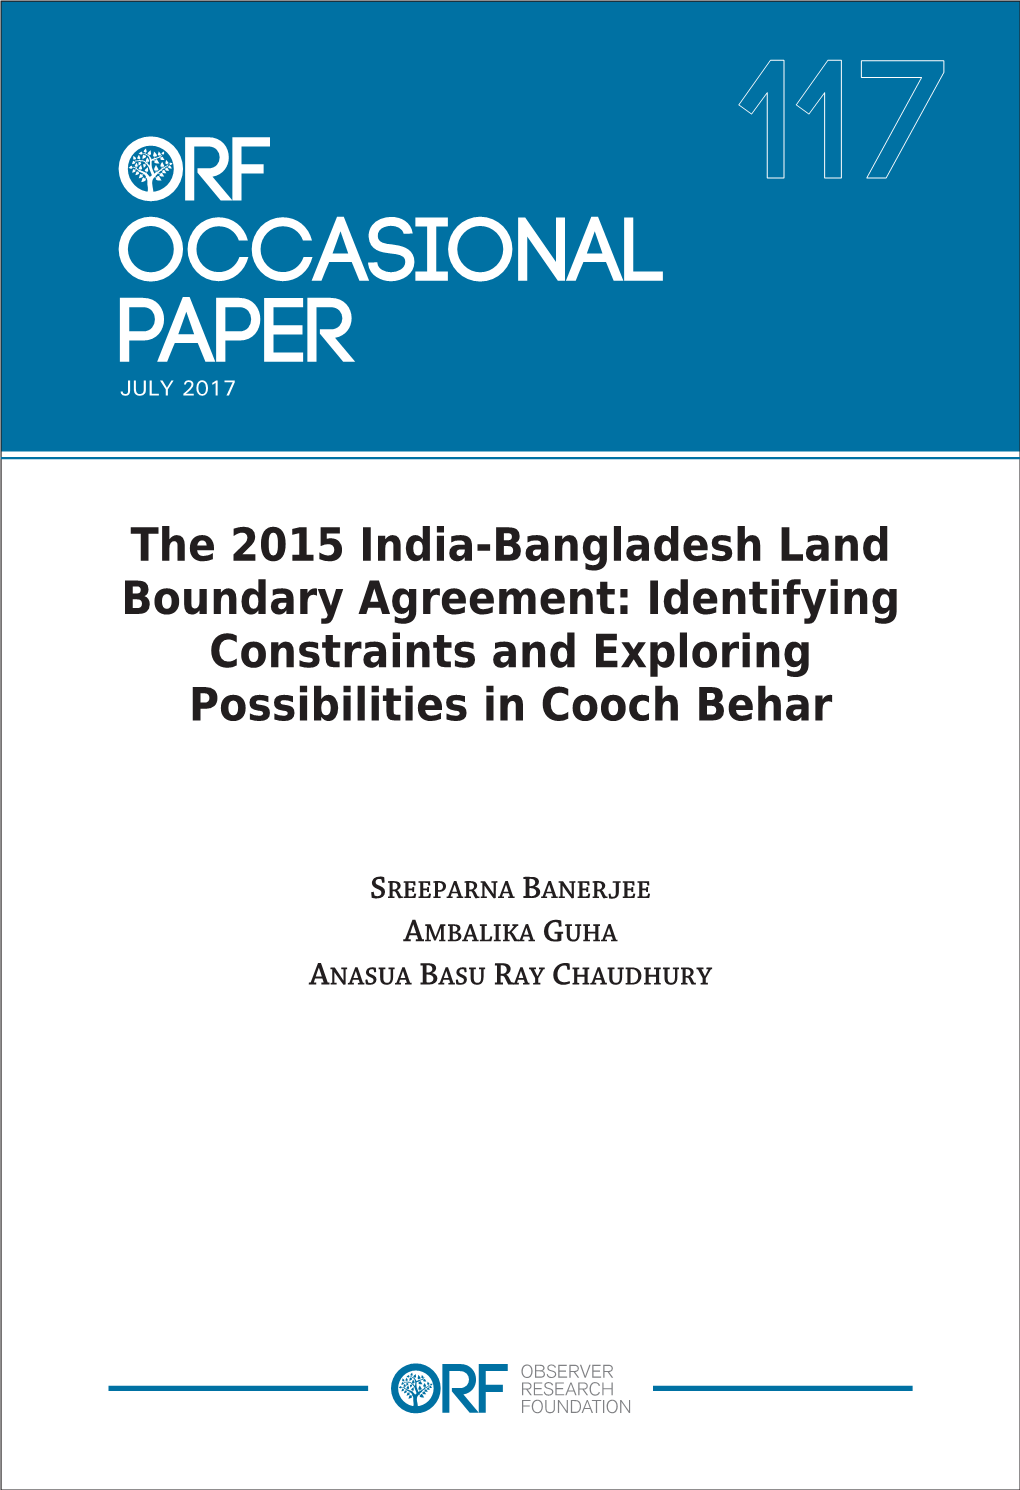 The 2015 India-Bangladesh Land Boundary Agreement: Identifying Constraints and Exploring Possibilities in Cooch Behar